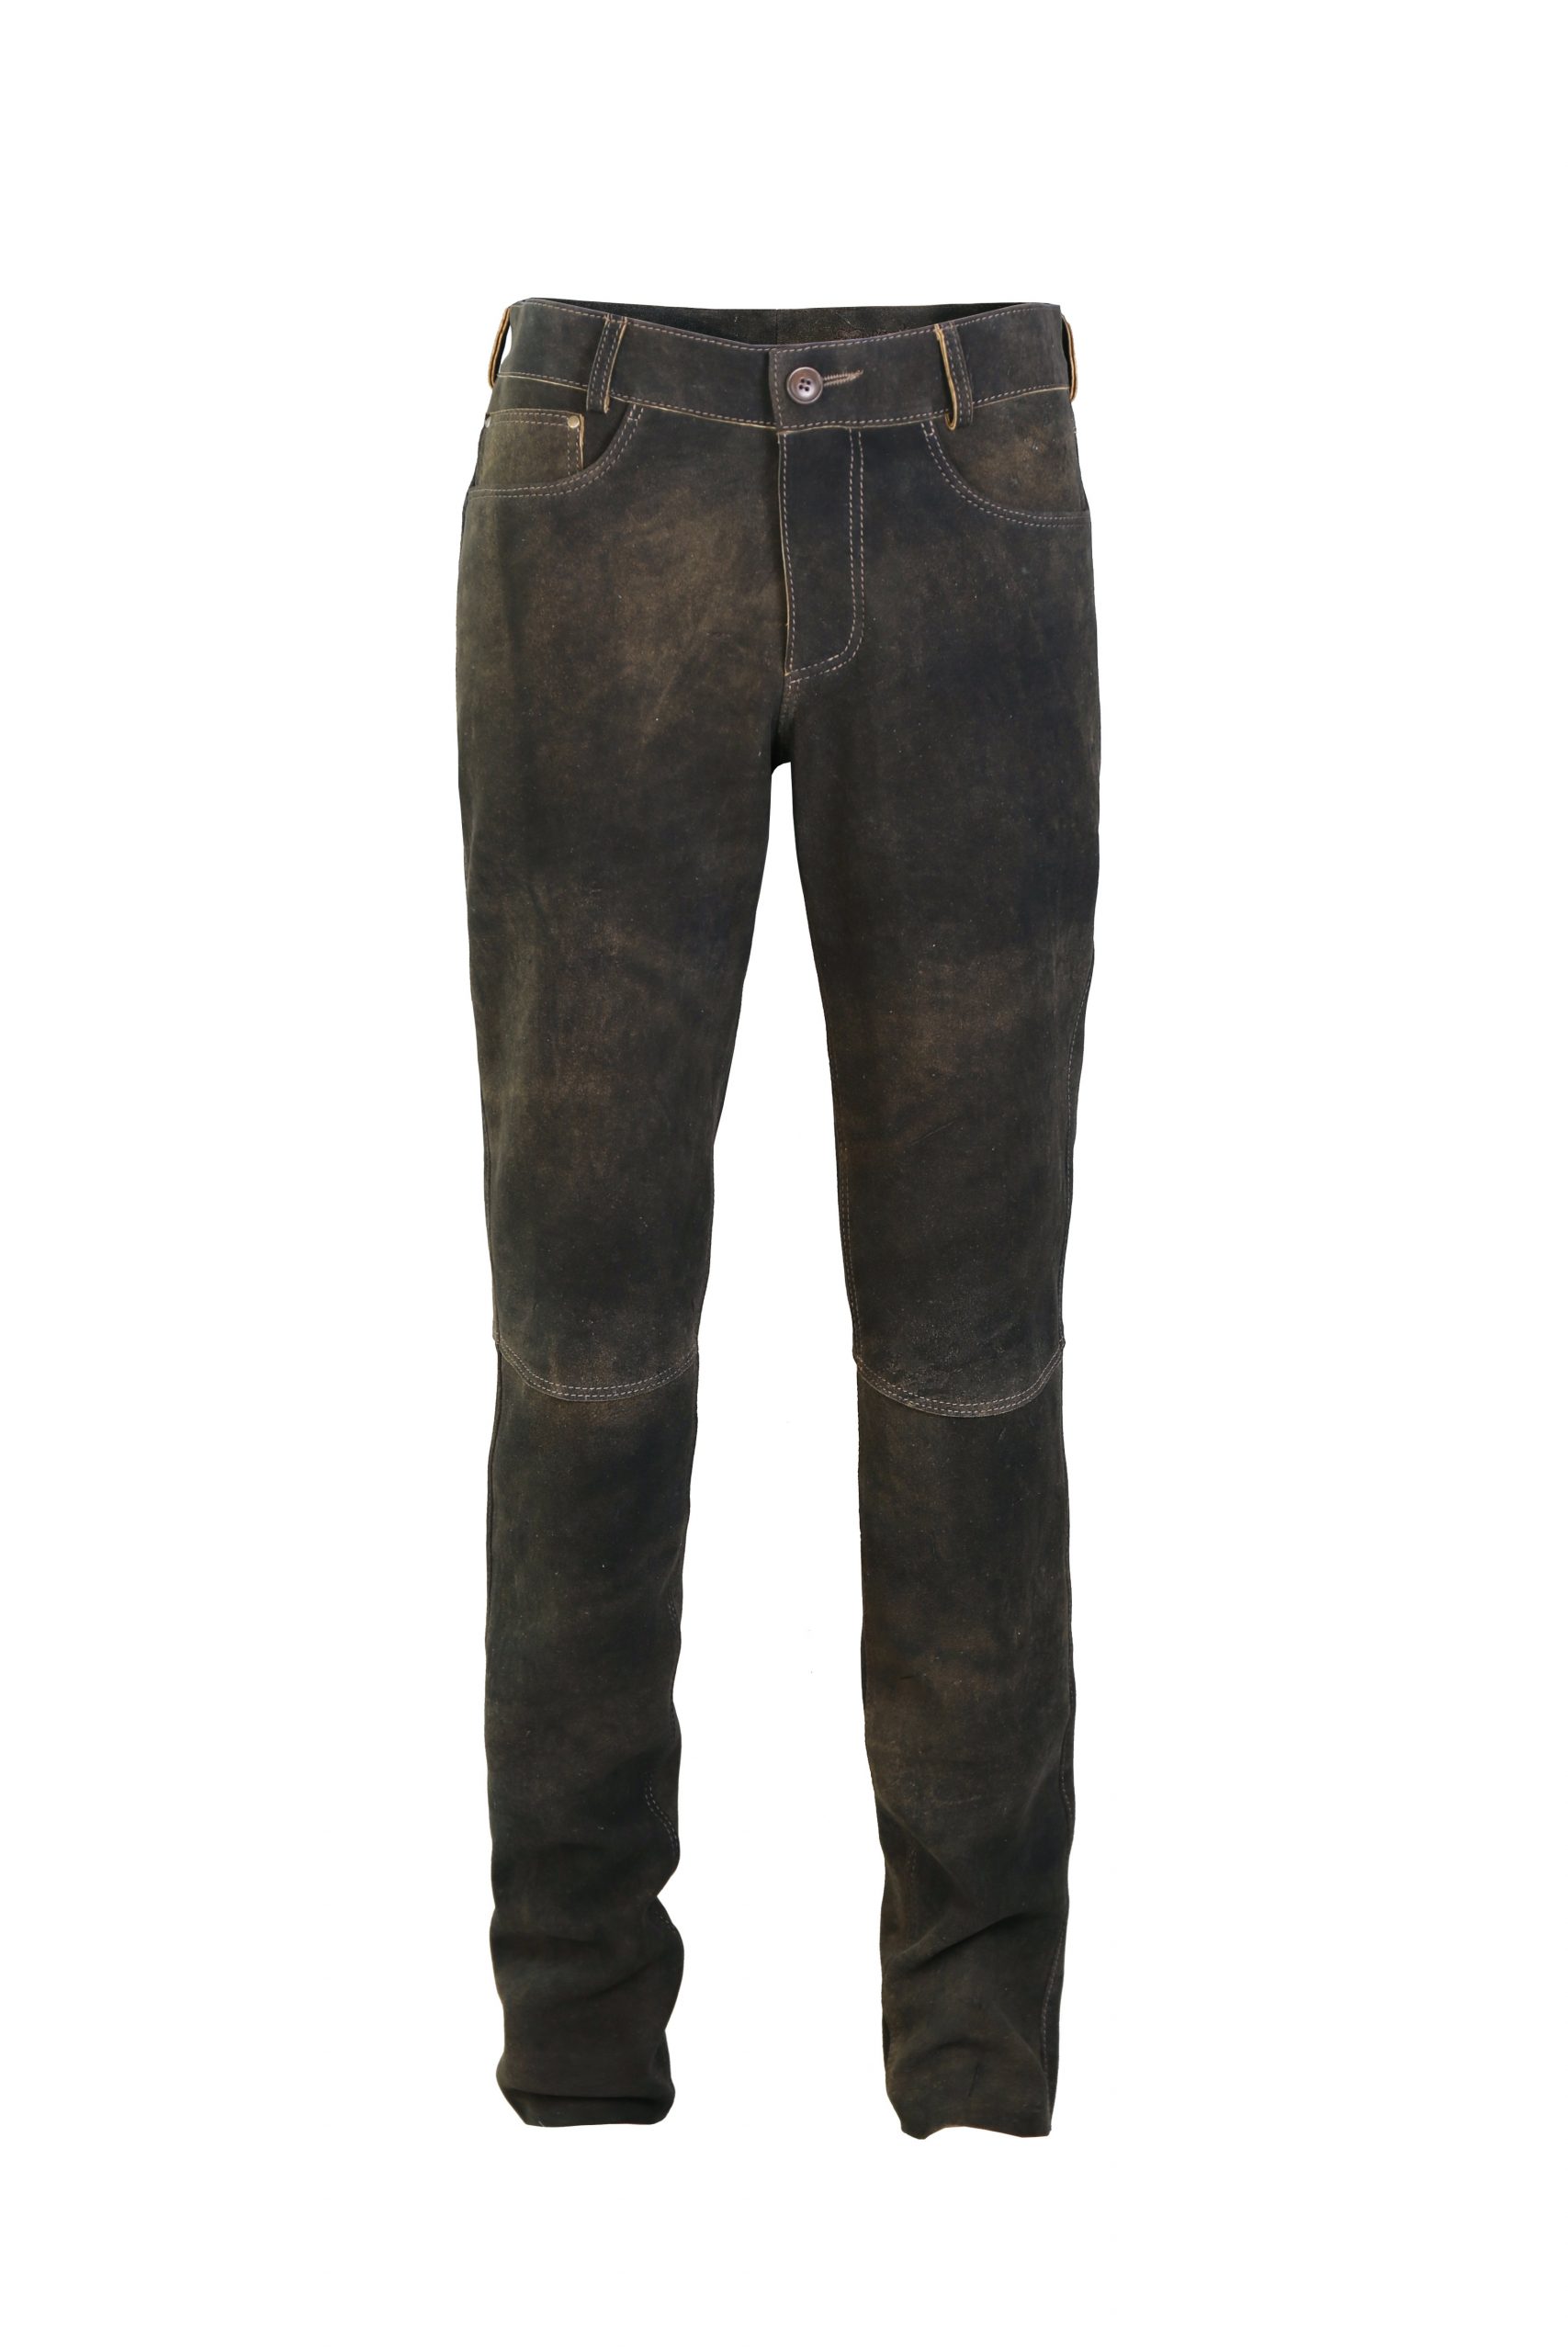 Deer Leather Trousers “Romeo”, maple